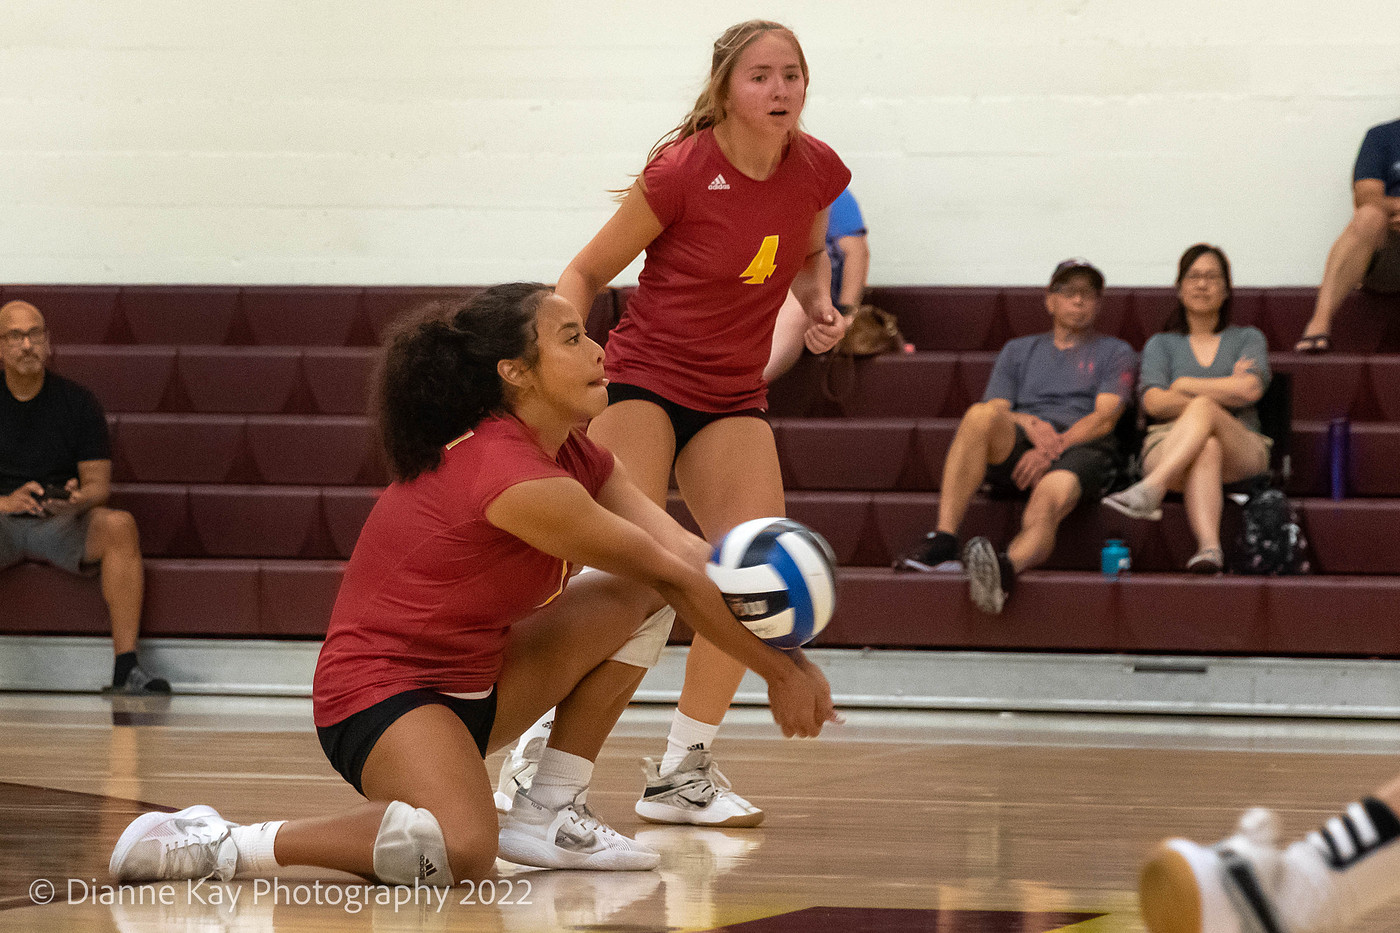 Sac City loses 3-0 (25-7, 25-9, 25-18) to the Golden Eagles